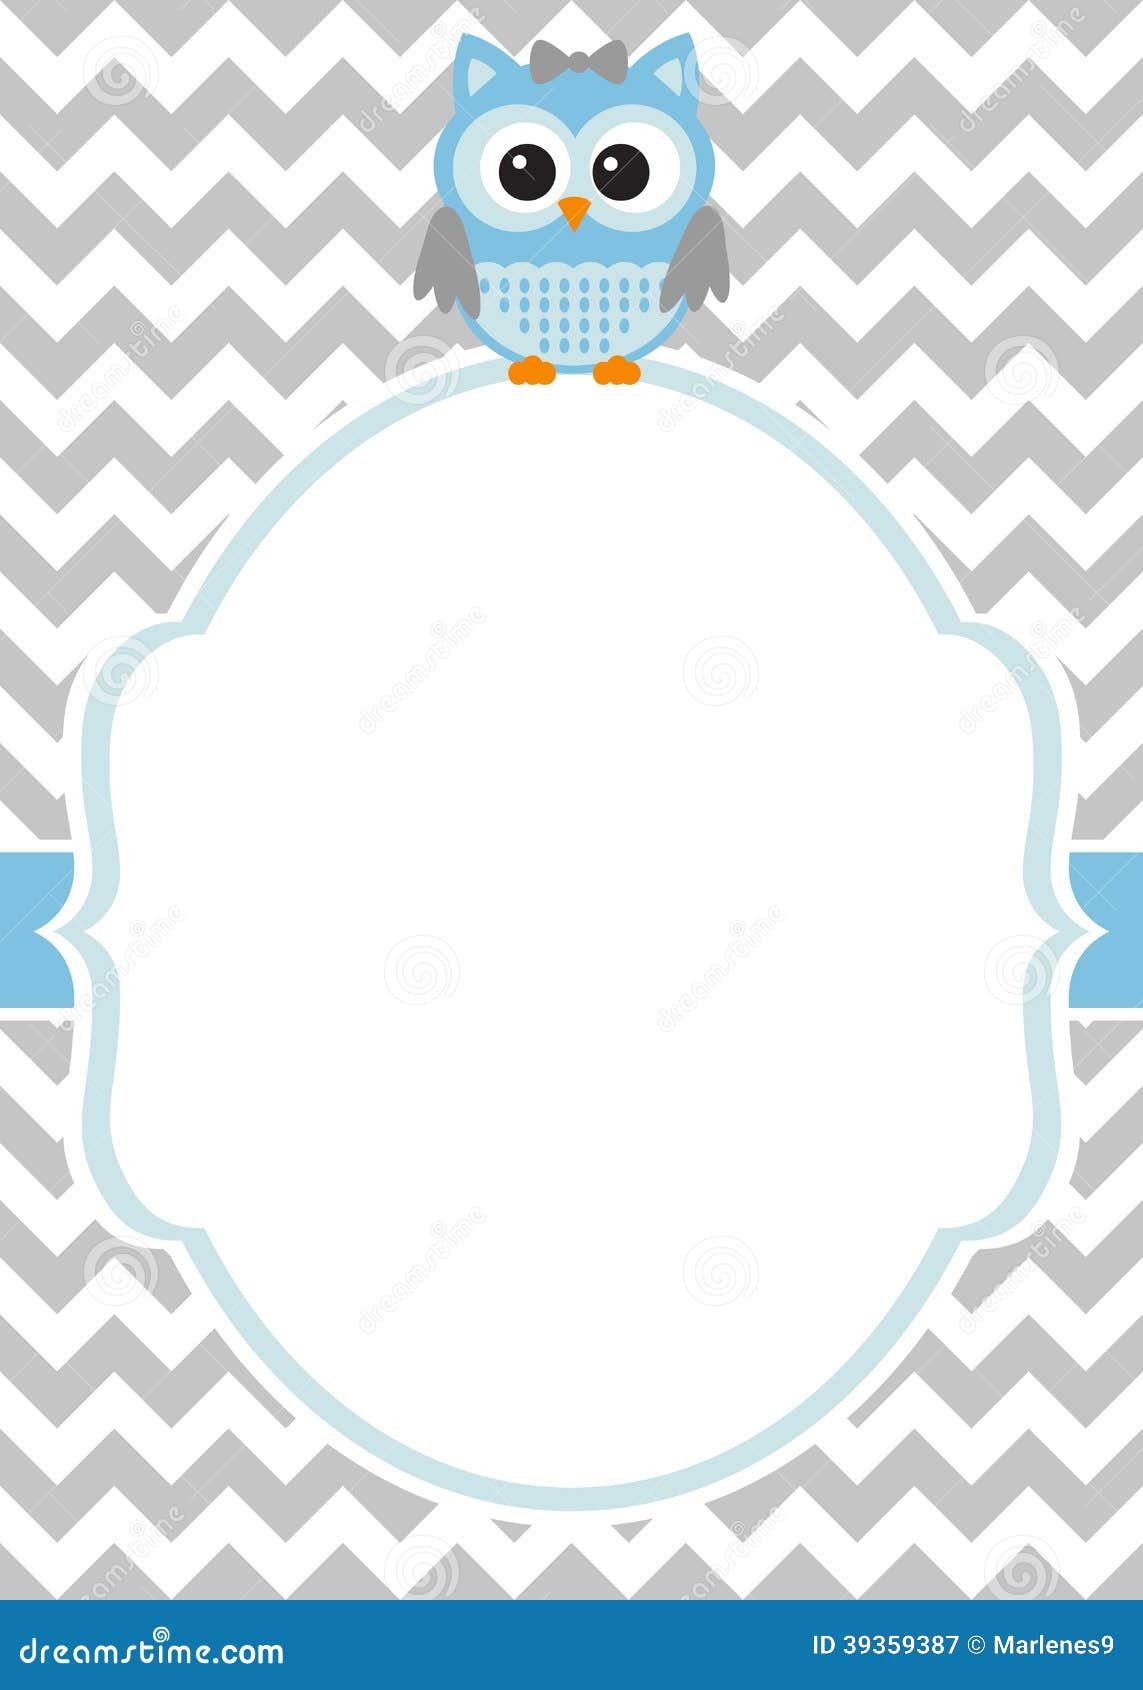 Baby Shower Card Template Microsoft Word from thumbs.dreamstime.com